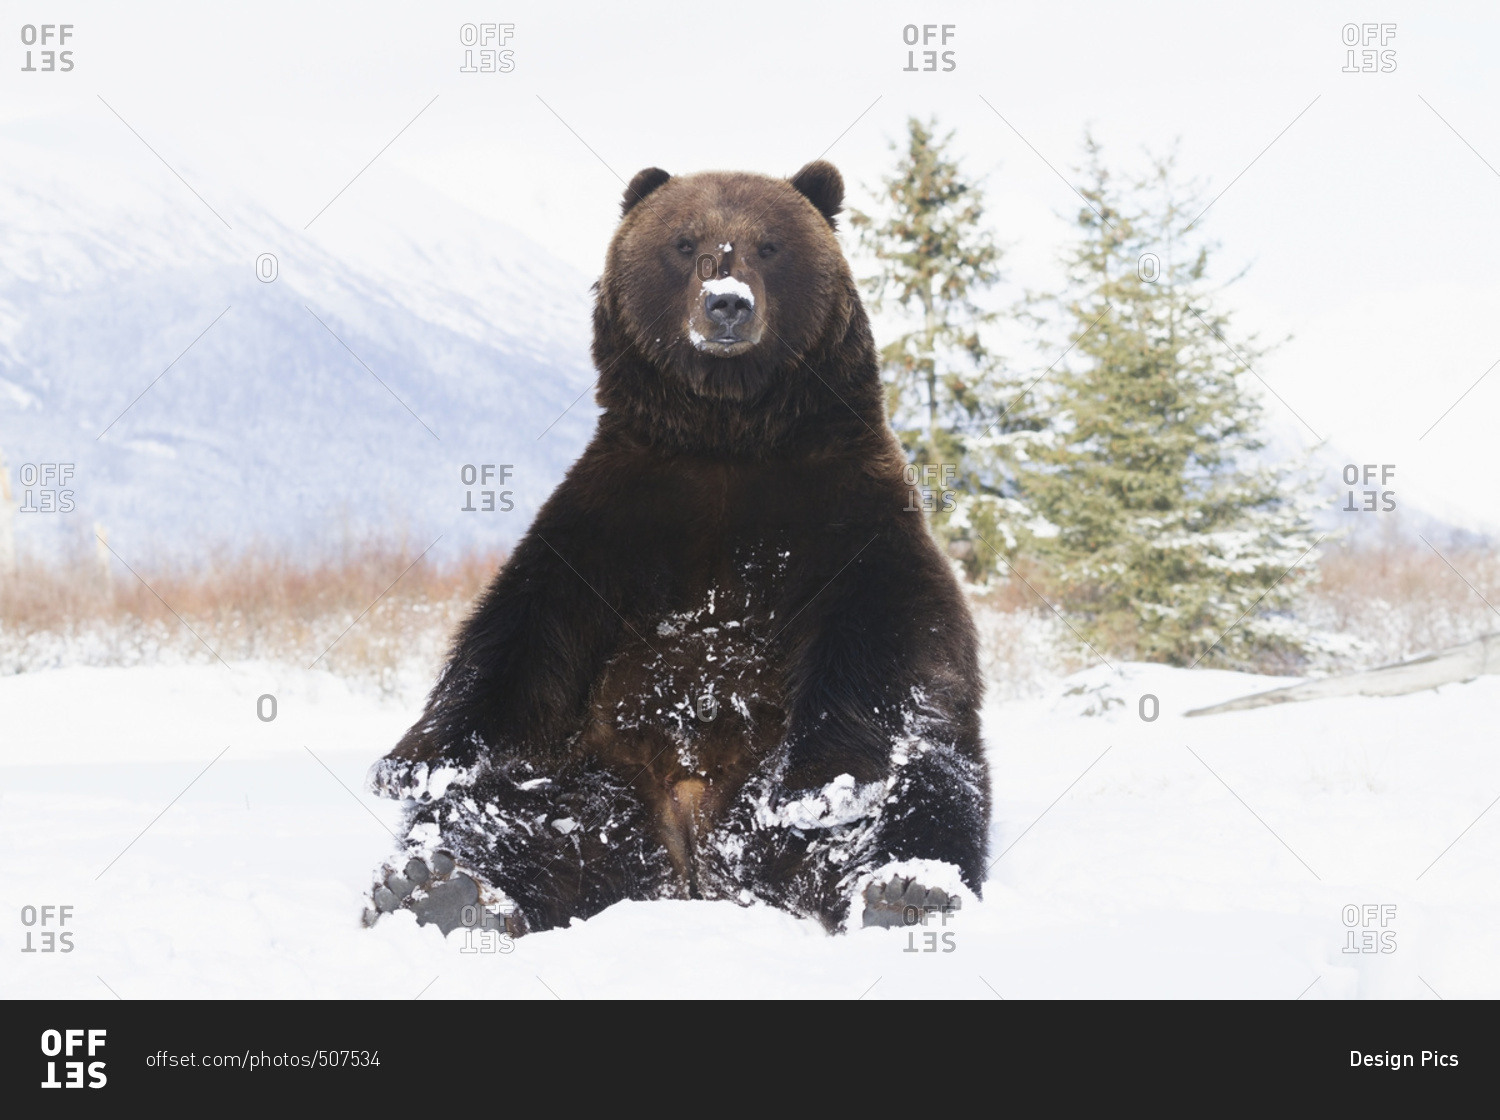 Captive Grizzly bear (ursus arctos horribilis) sitting in snow at the Alaska Wildlife Conservation Center in winter; Portage, Alaska, United States of America